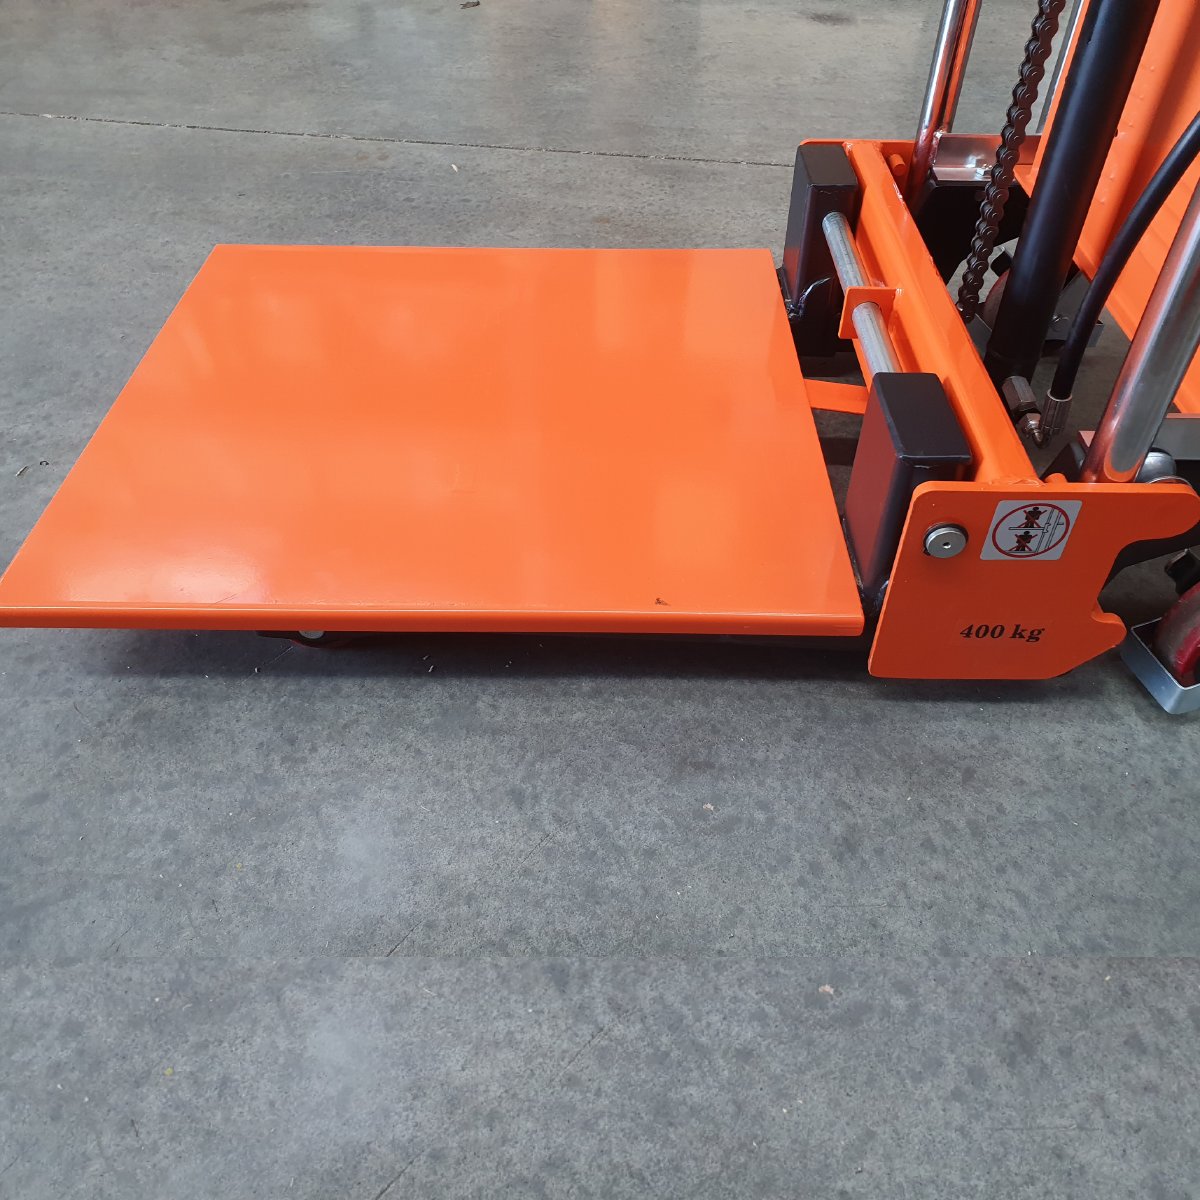 Buy Electric Platform Lifter 400kg in Utility Lifters | Materials Handling Lift Towers available at Astrolift NZ